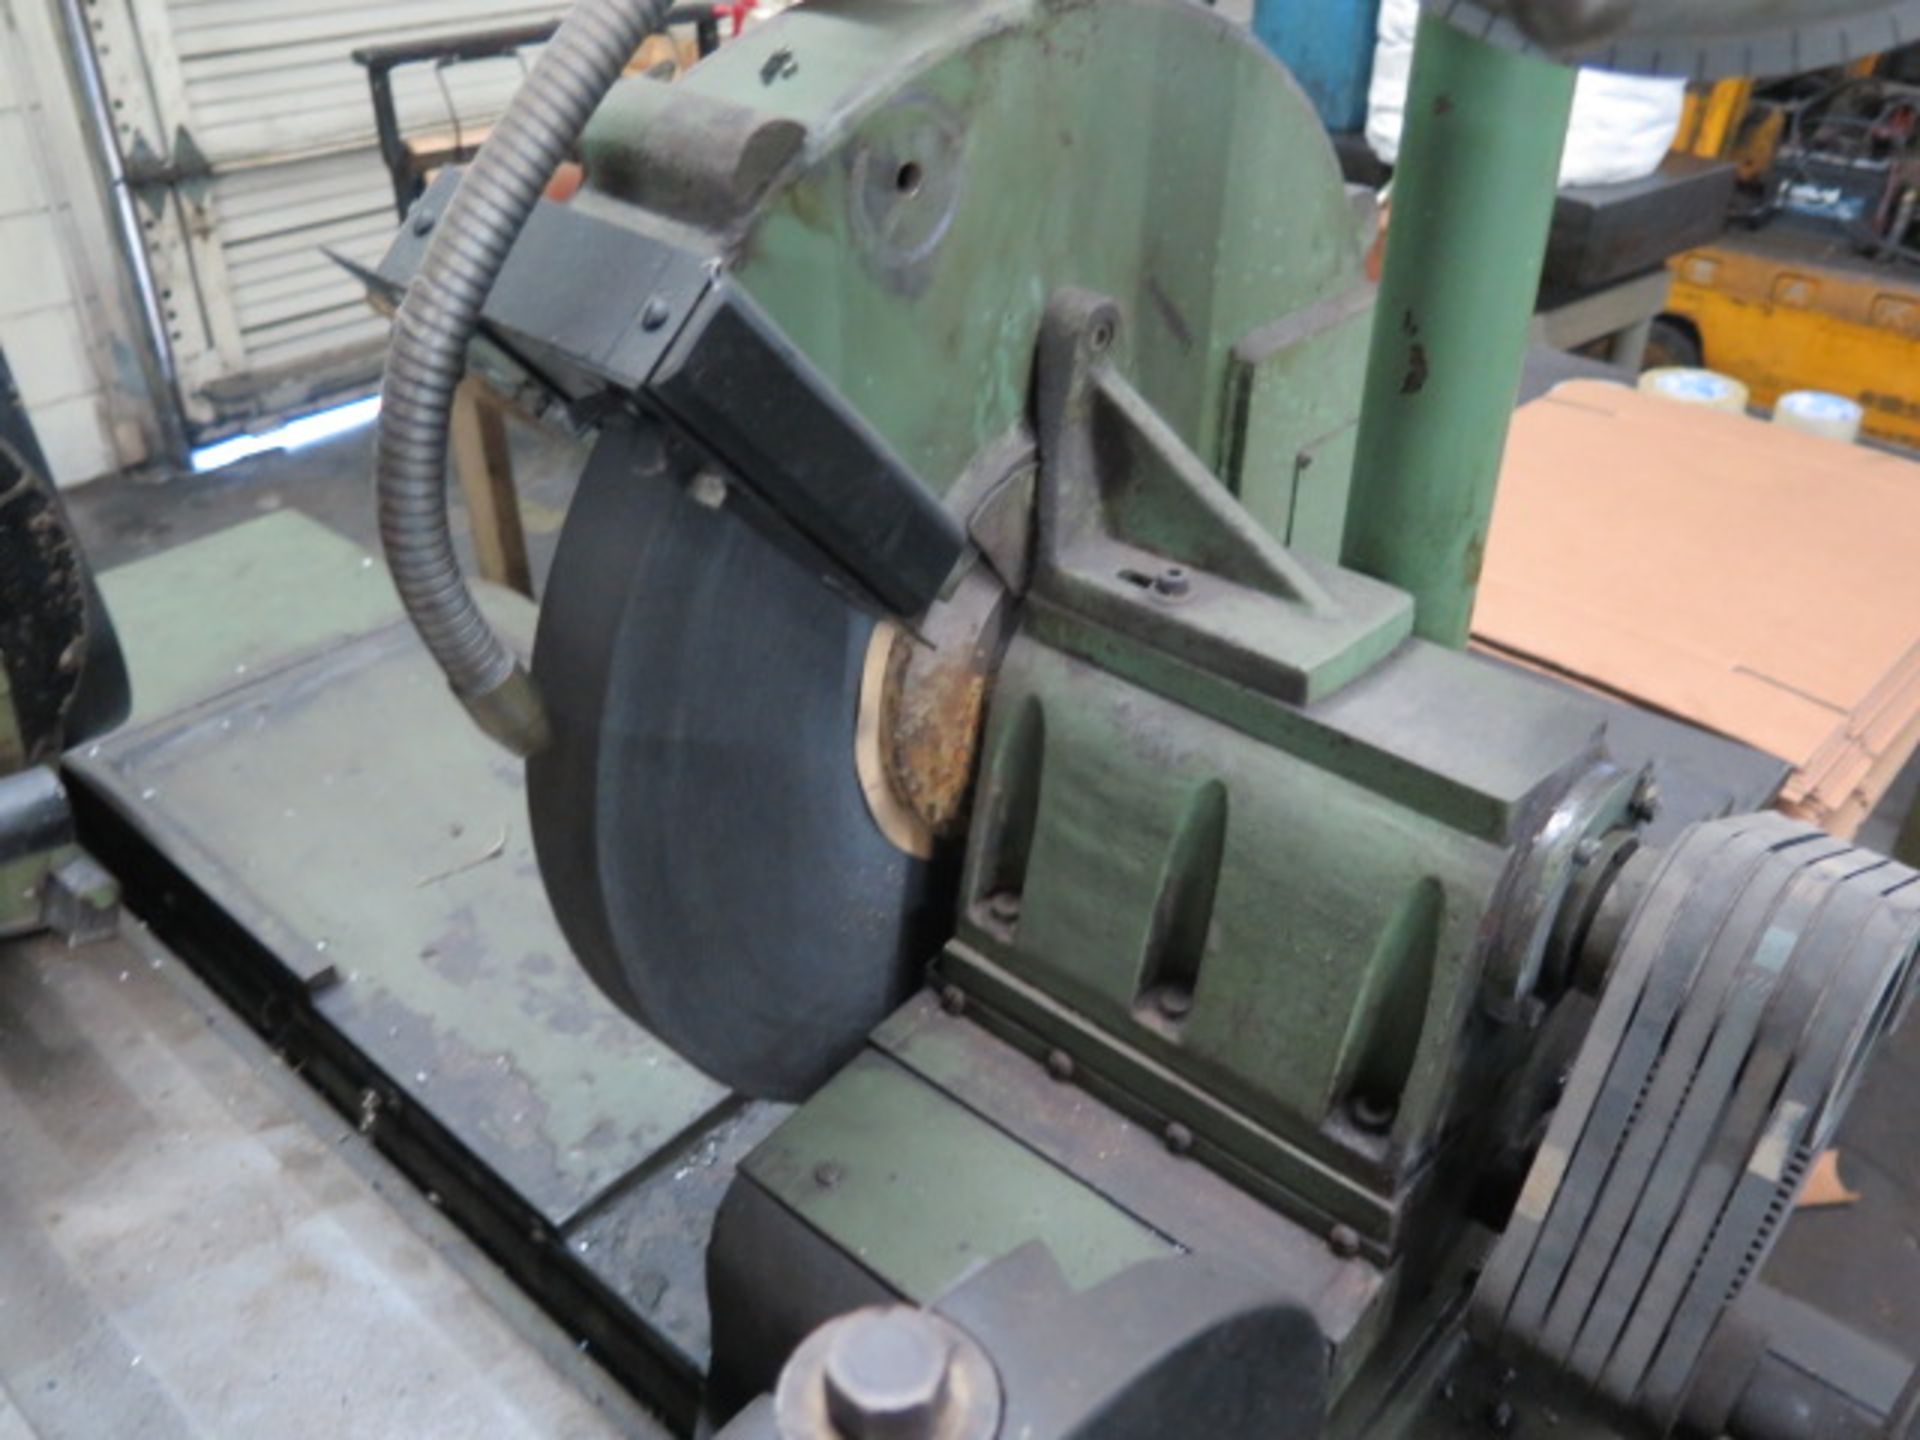 Storm Vulcan mdl. 15 Cam Shaft Grinder s/n 800-76 w/ Motorized Work Head, Tailstock, SOLD AS IS - Image 11 of 16